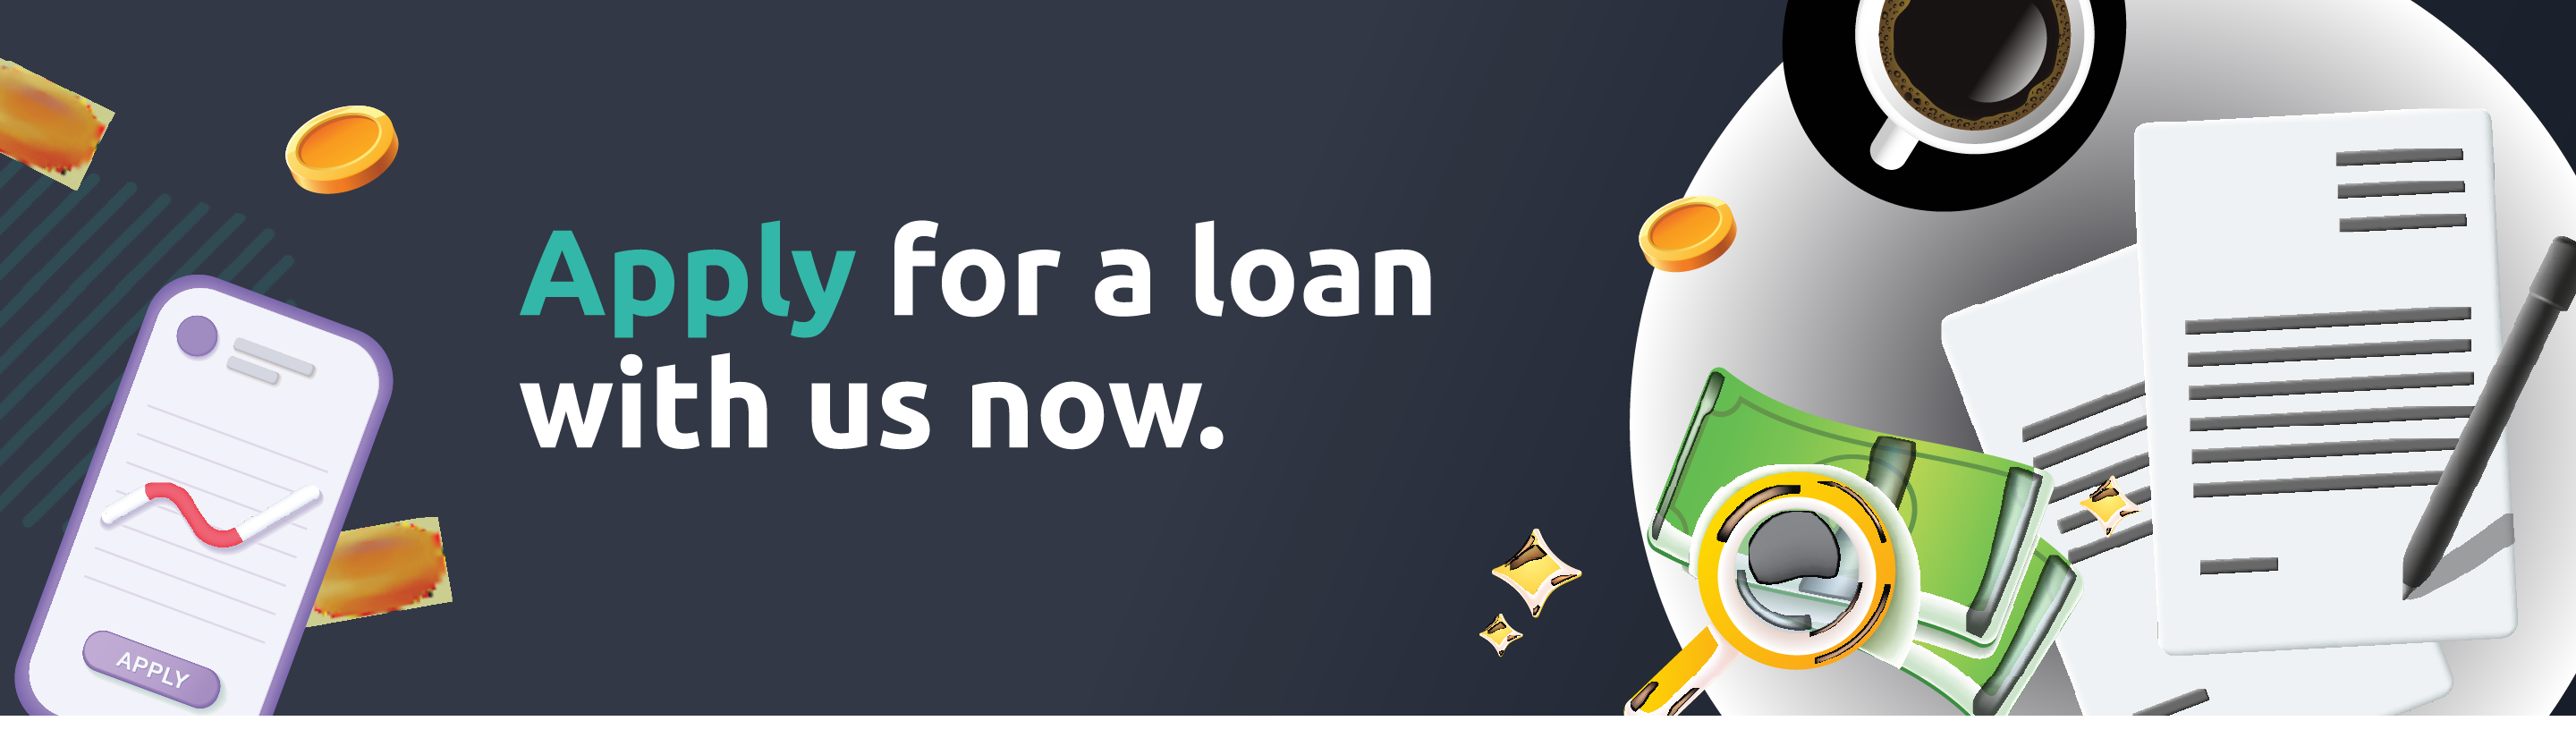 Apply for a loan with us now